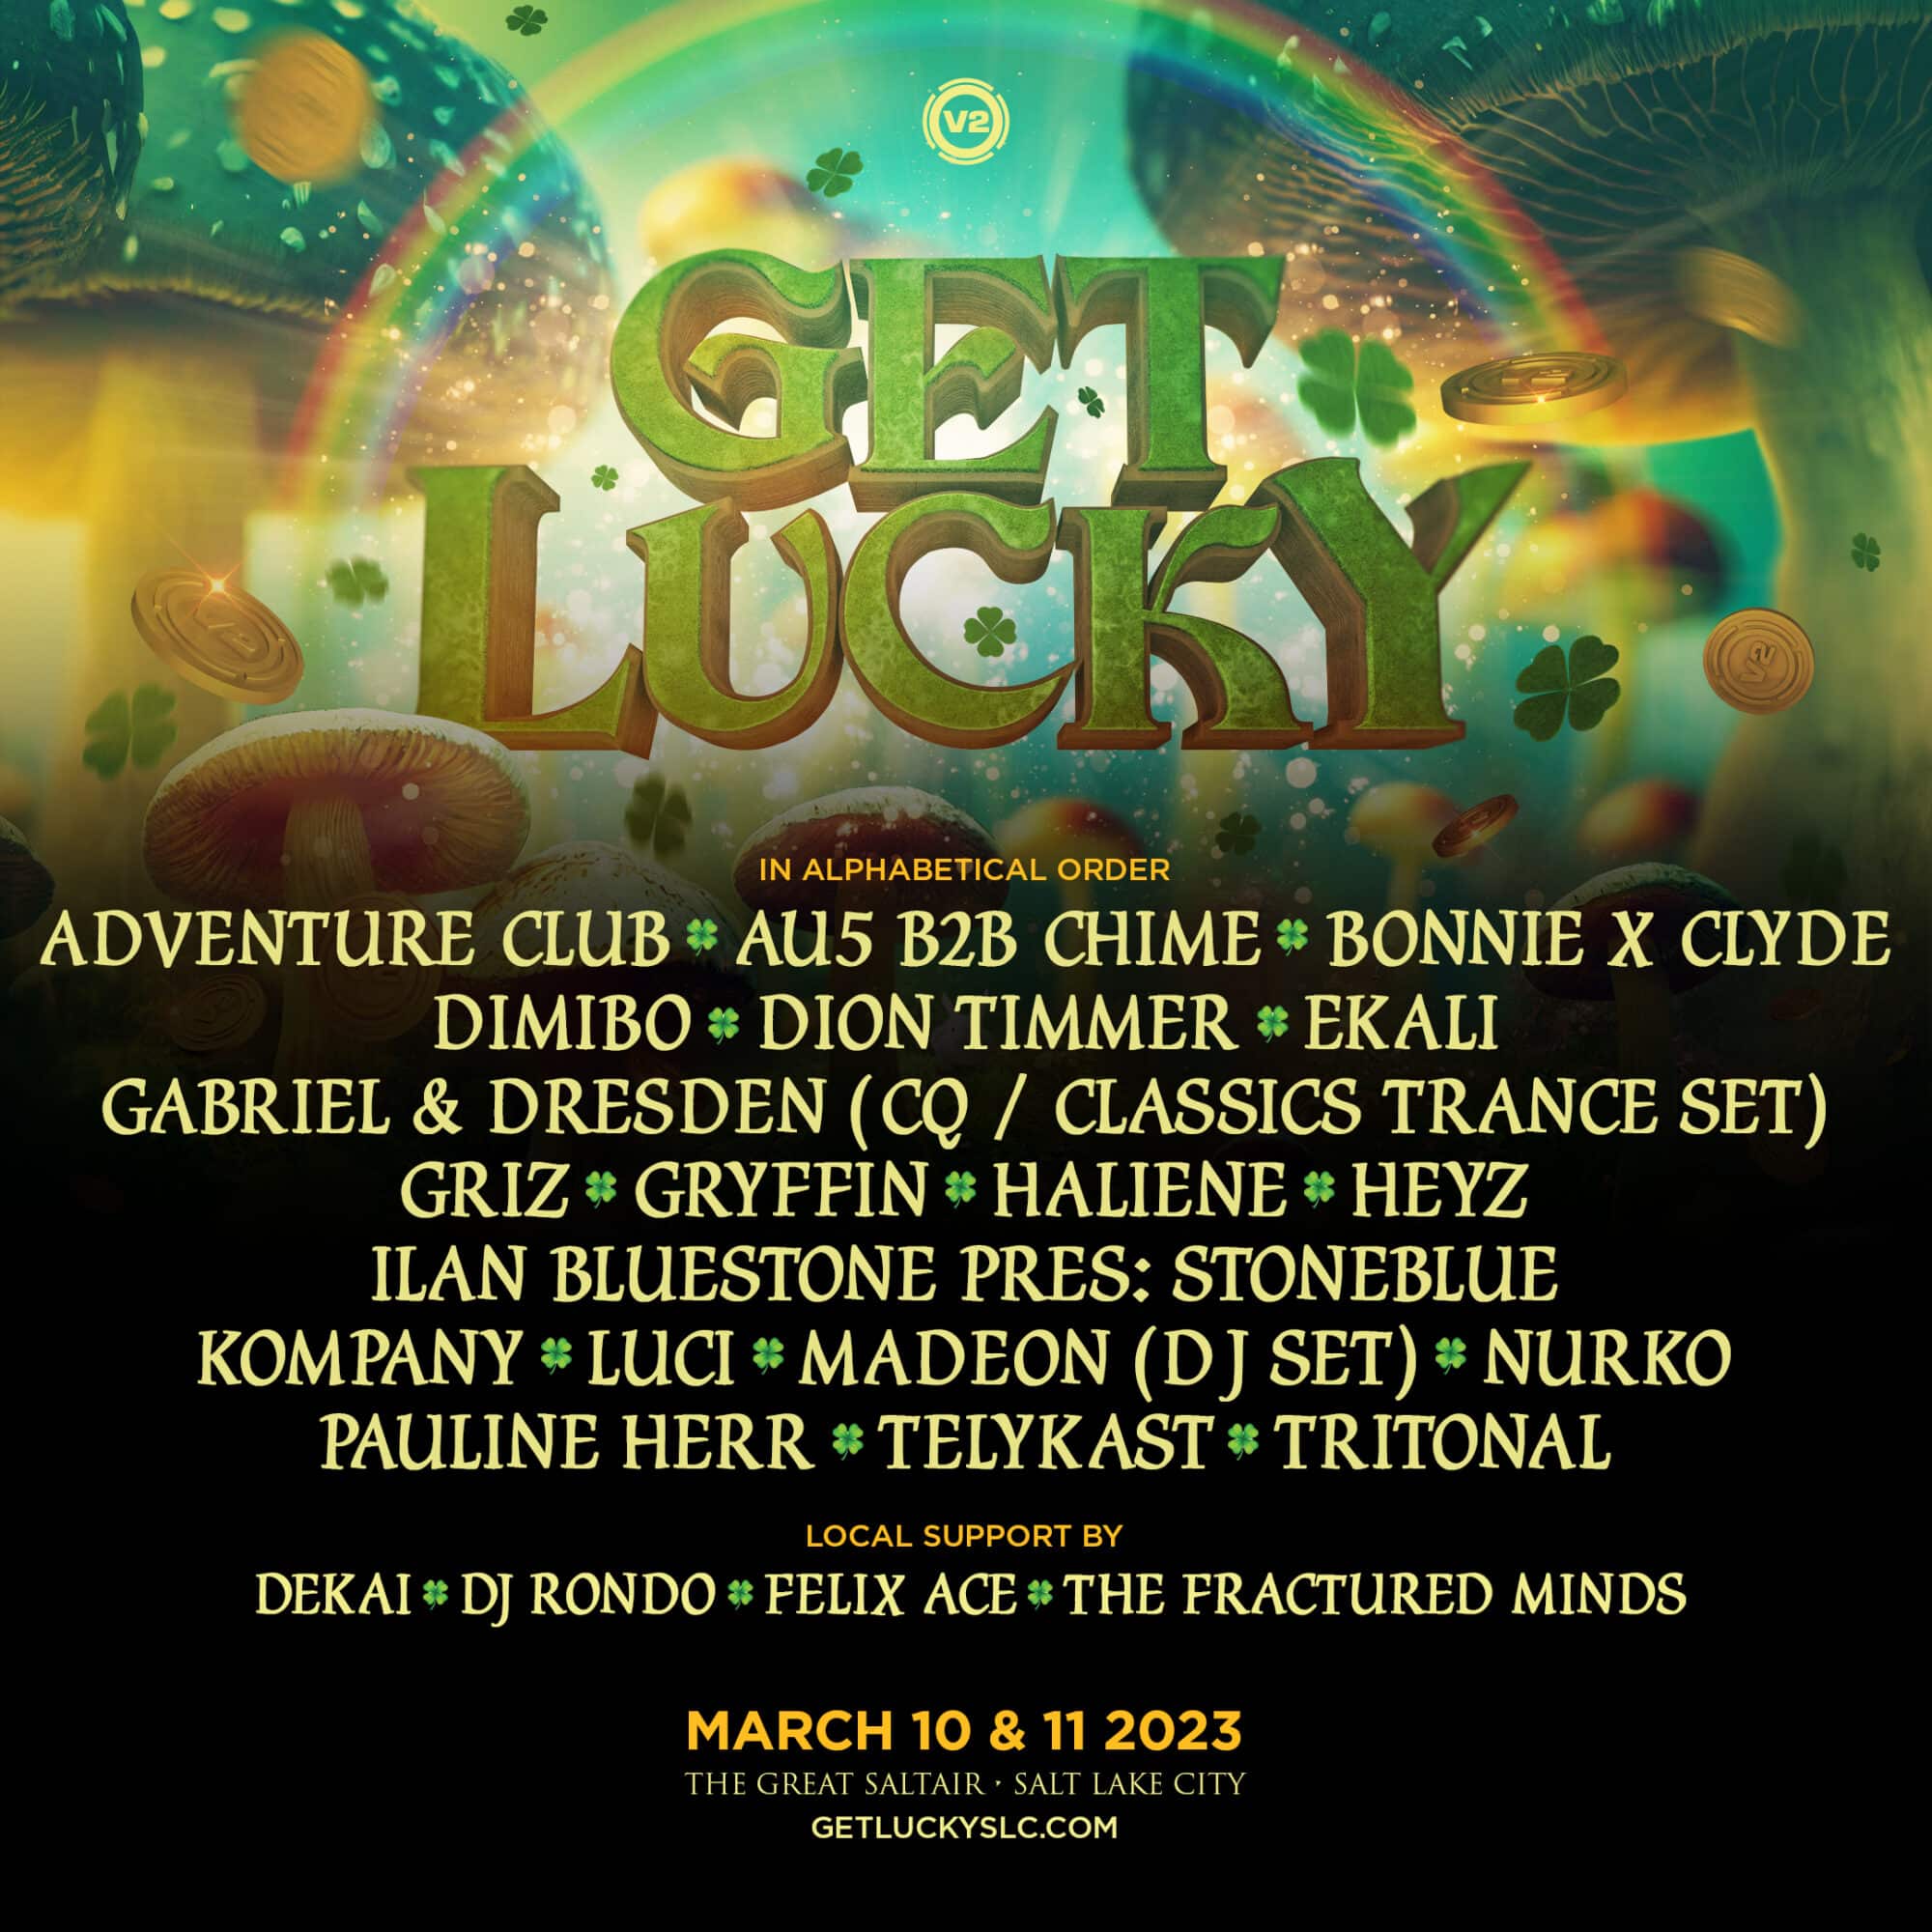 V2 Presents Reveals Full Lineup for Get Lucky 2023 EDM Identity